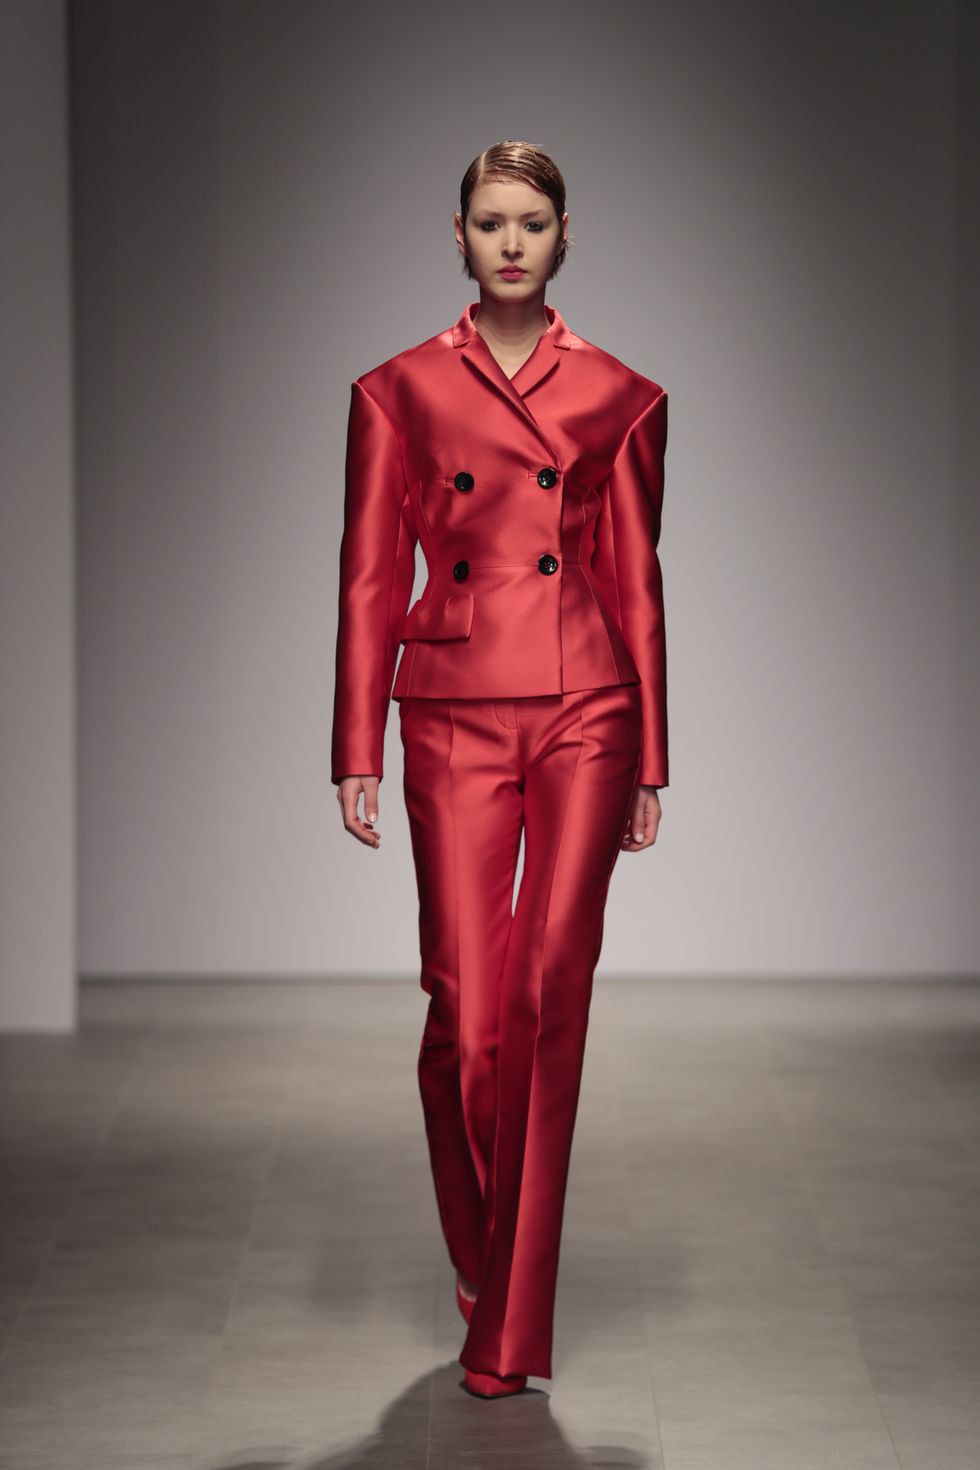 Fashion model, Fashion, Clothing, Suit, Runway, Red, Fashion show, Formal wear, Pantsuit, Haute couture, 